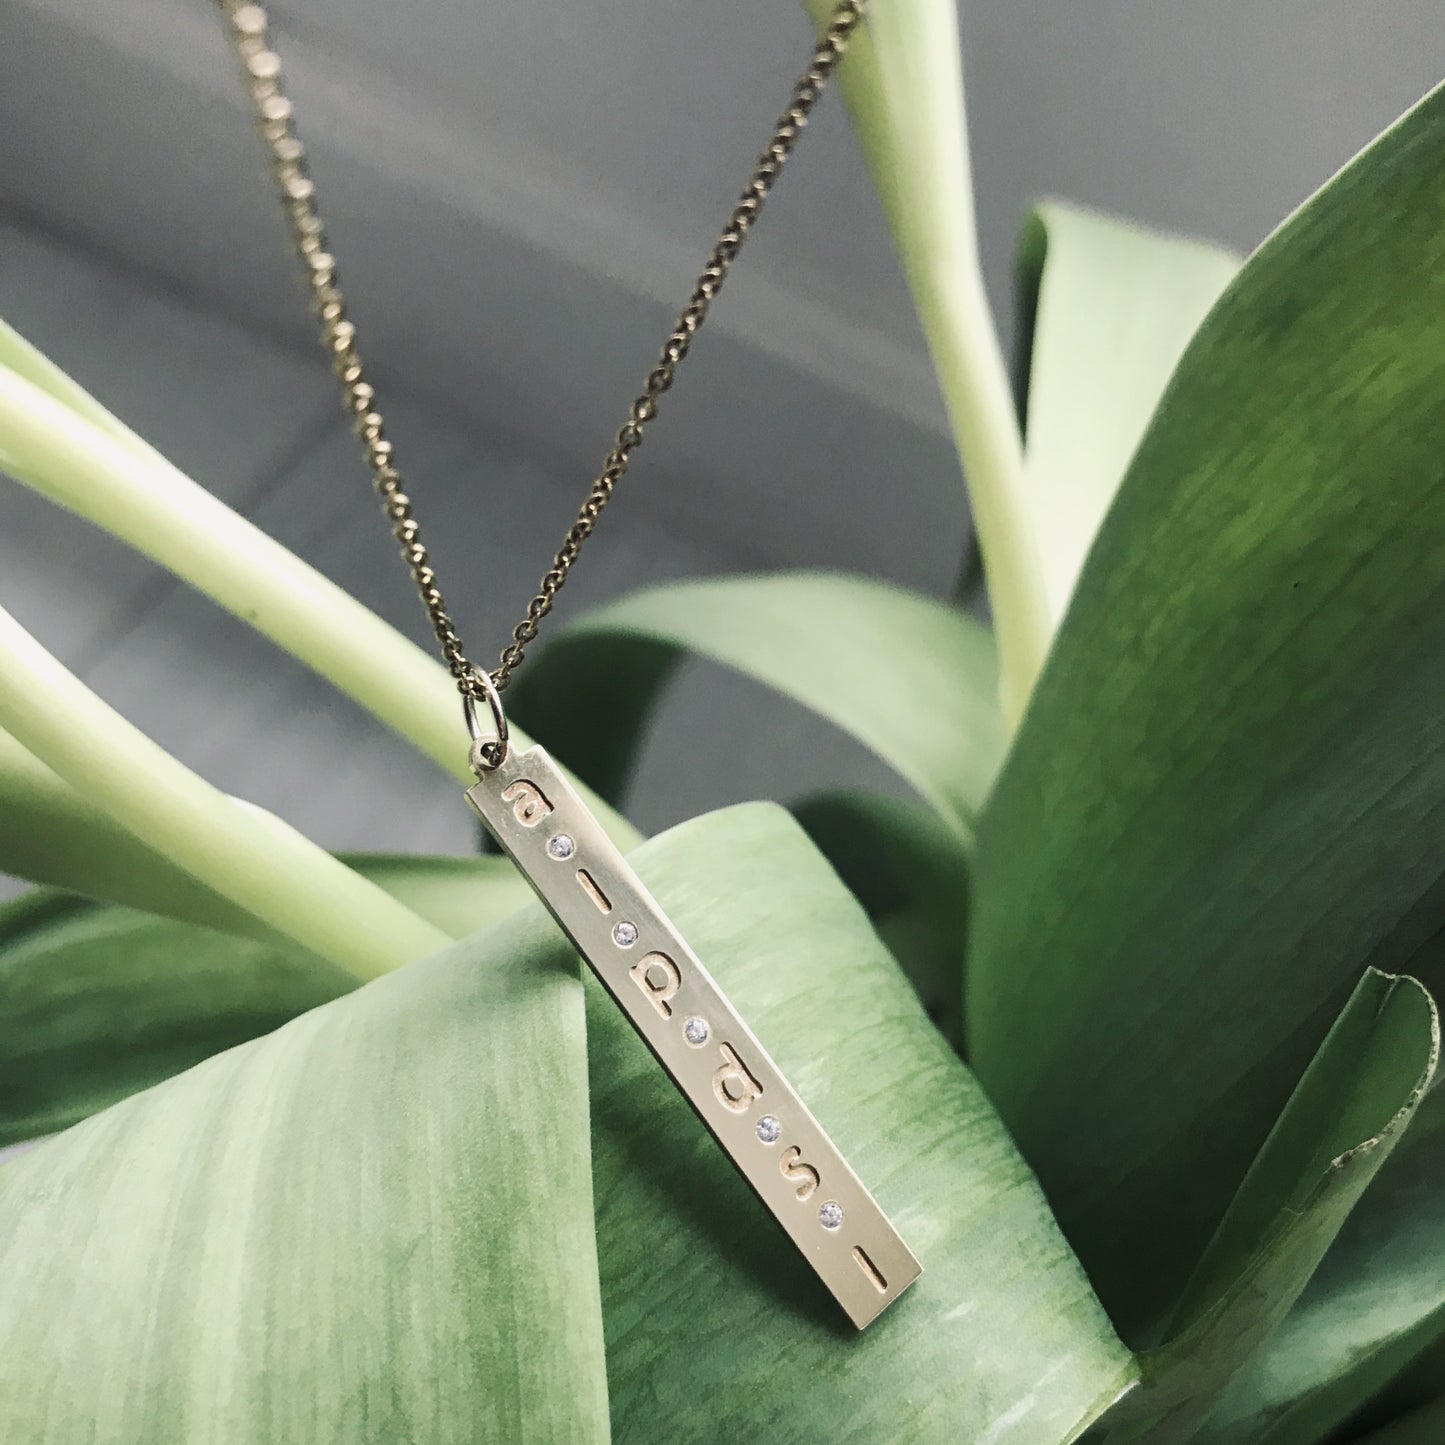 LE TAG necklace - BYVELA jewellery